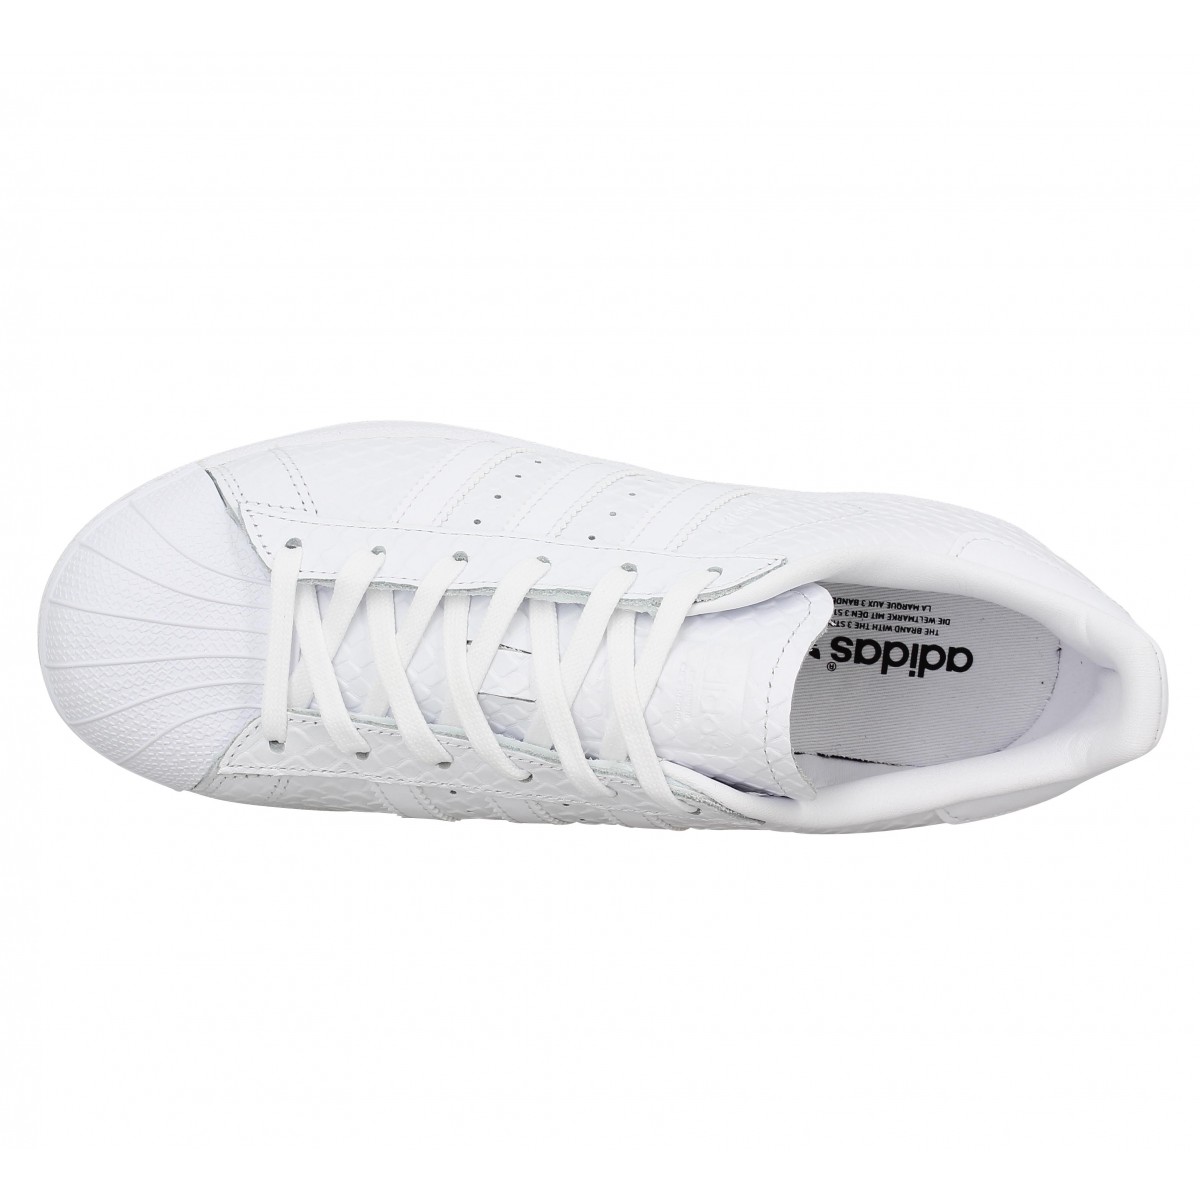 chaussure superstar reptile